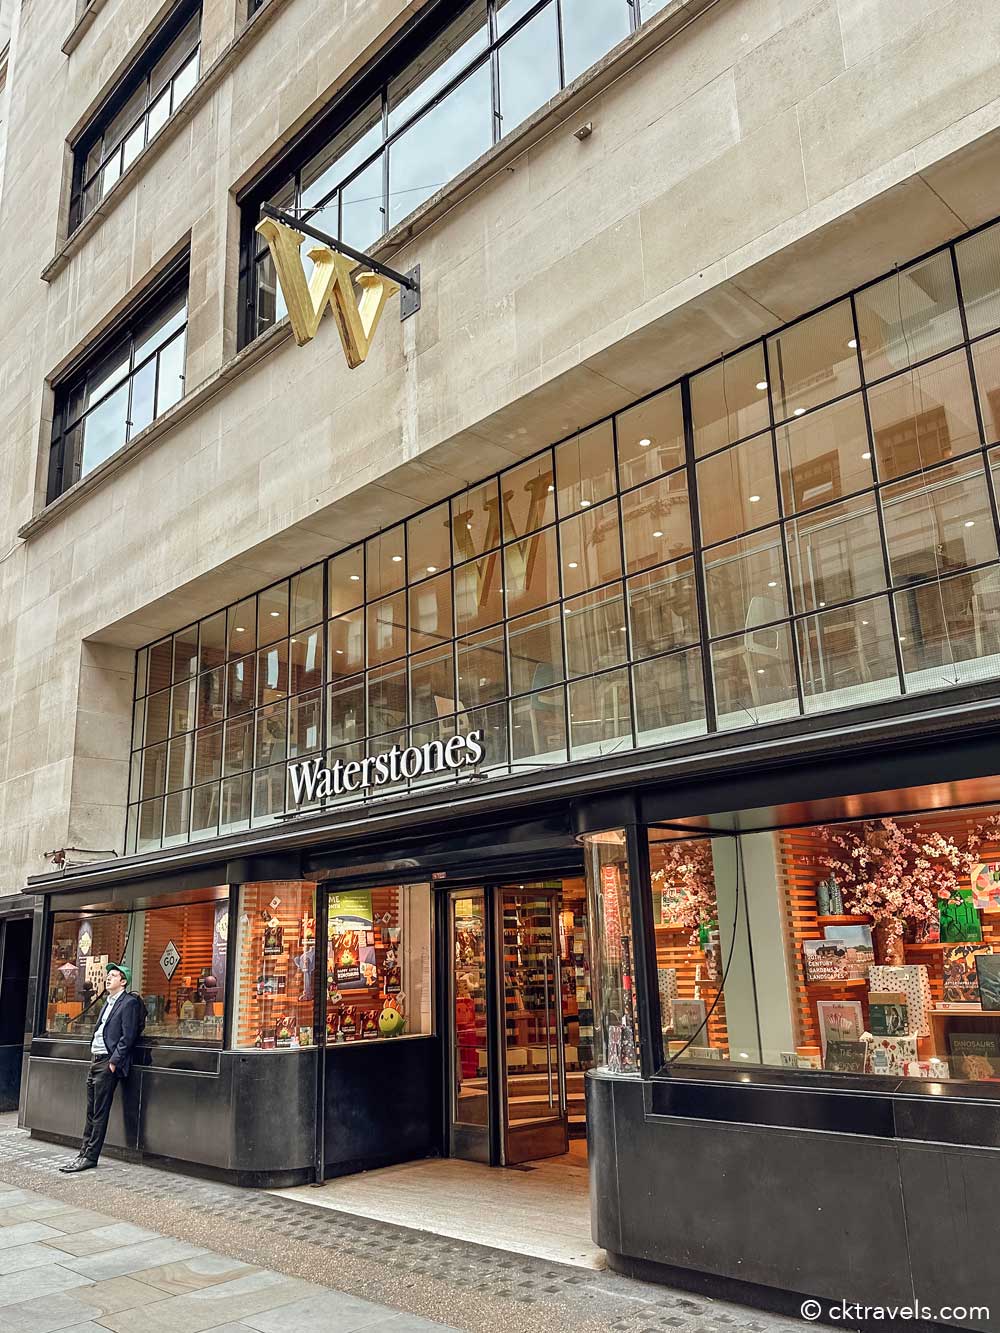 waterstones near Piccadilly Circus station London